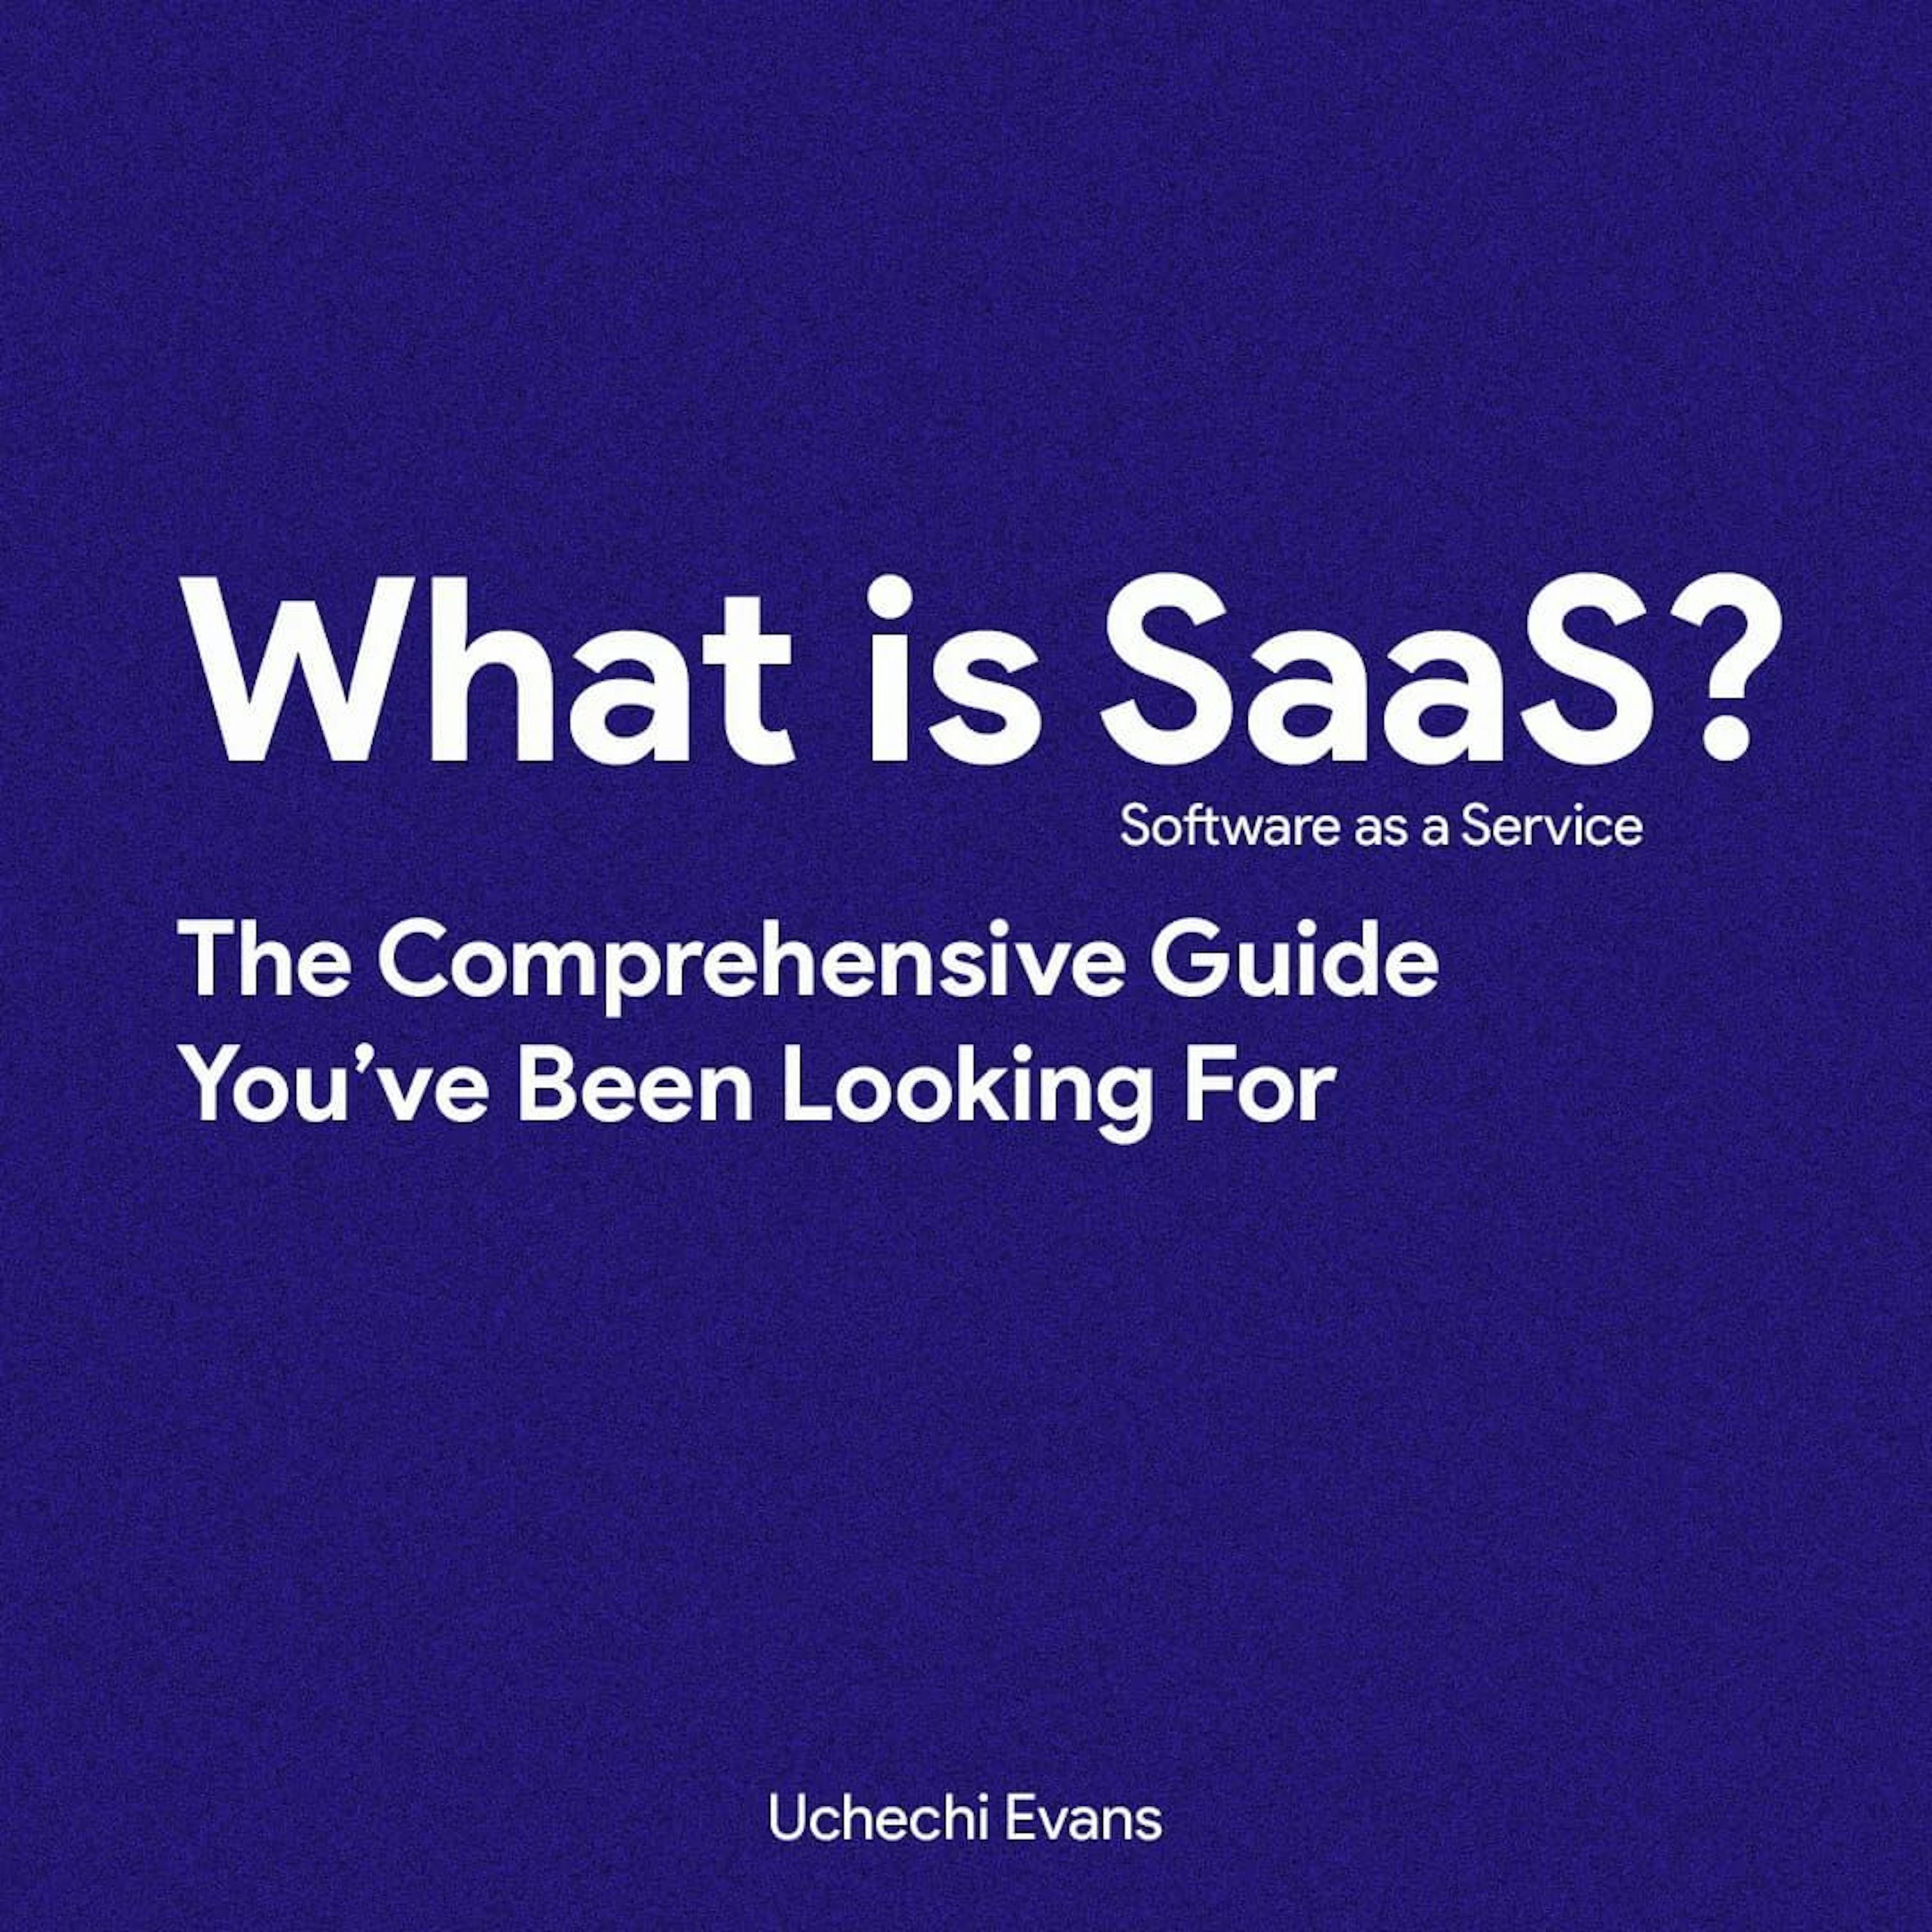 featured image - What is SaaS? — The Comprehensive Guide You’ve Been Looking For